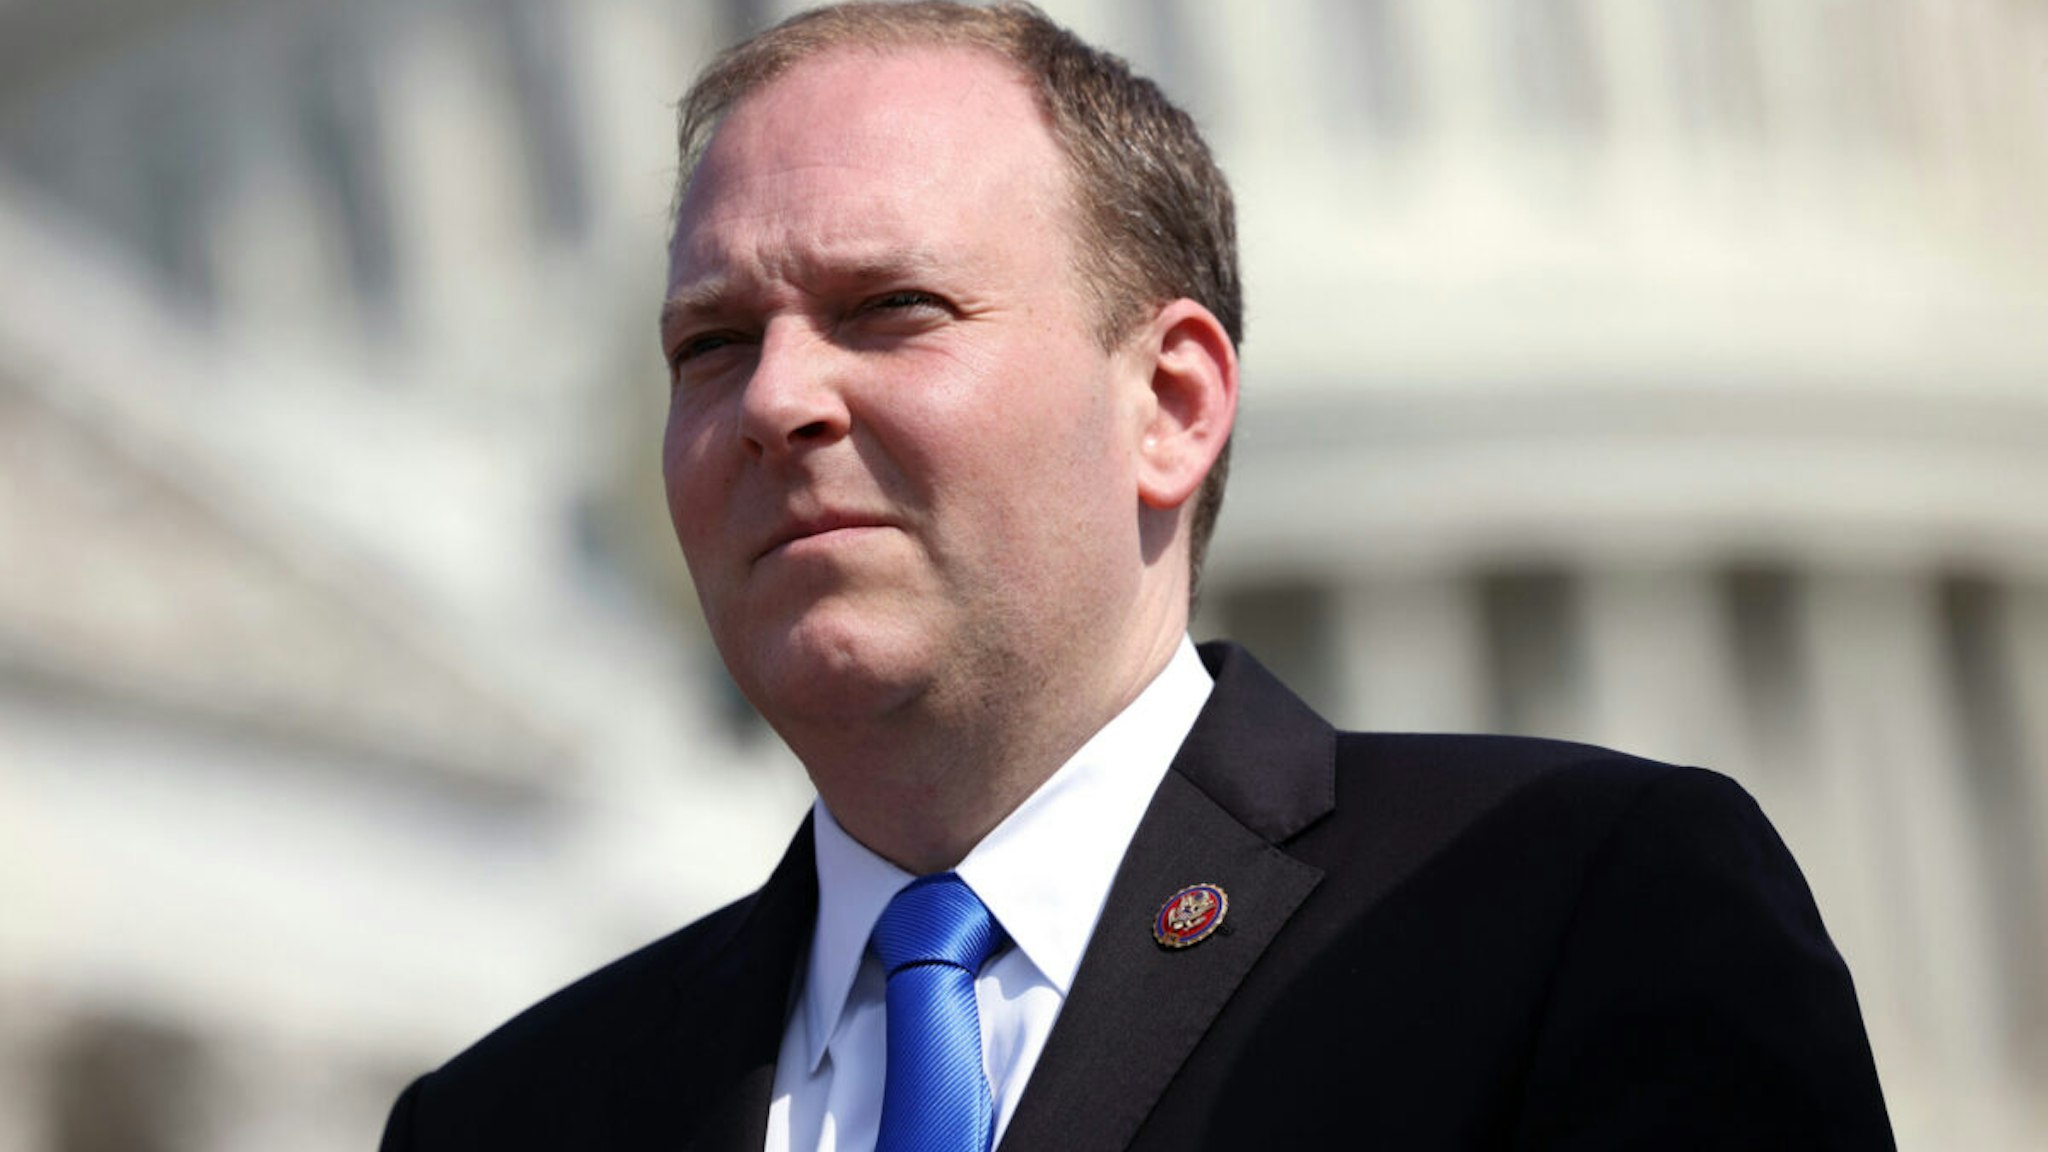 ep. Lee Zeldin (R-NY) attends a press conference on the current conflict between Israel and the Palestinians on May 20, 2021 in Washington, DC.